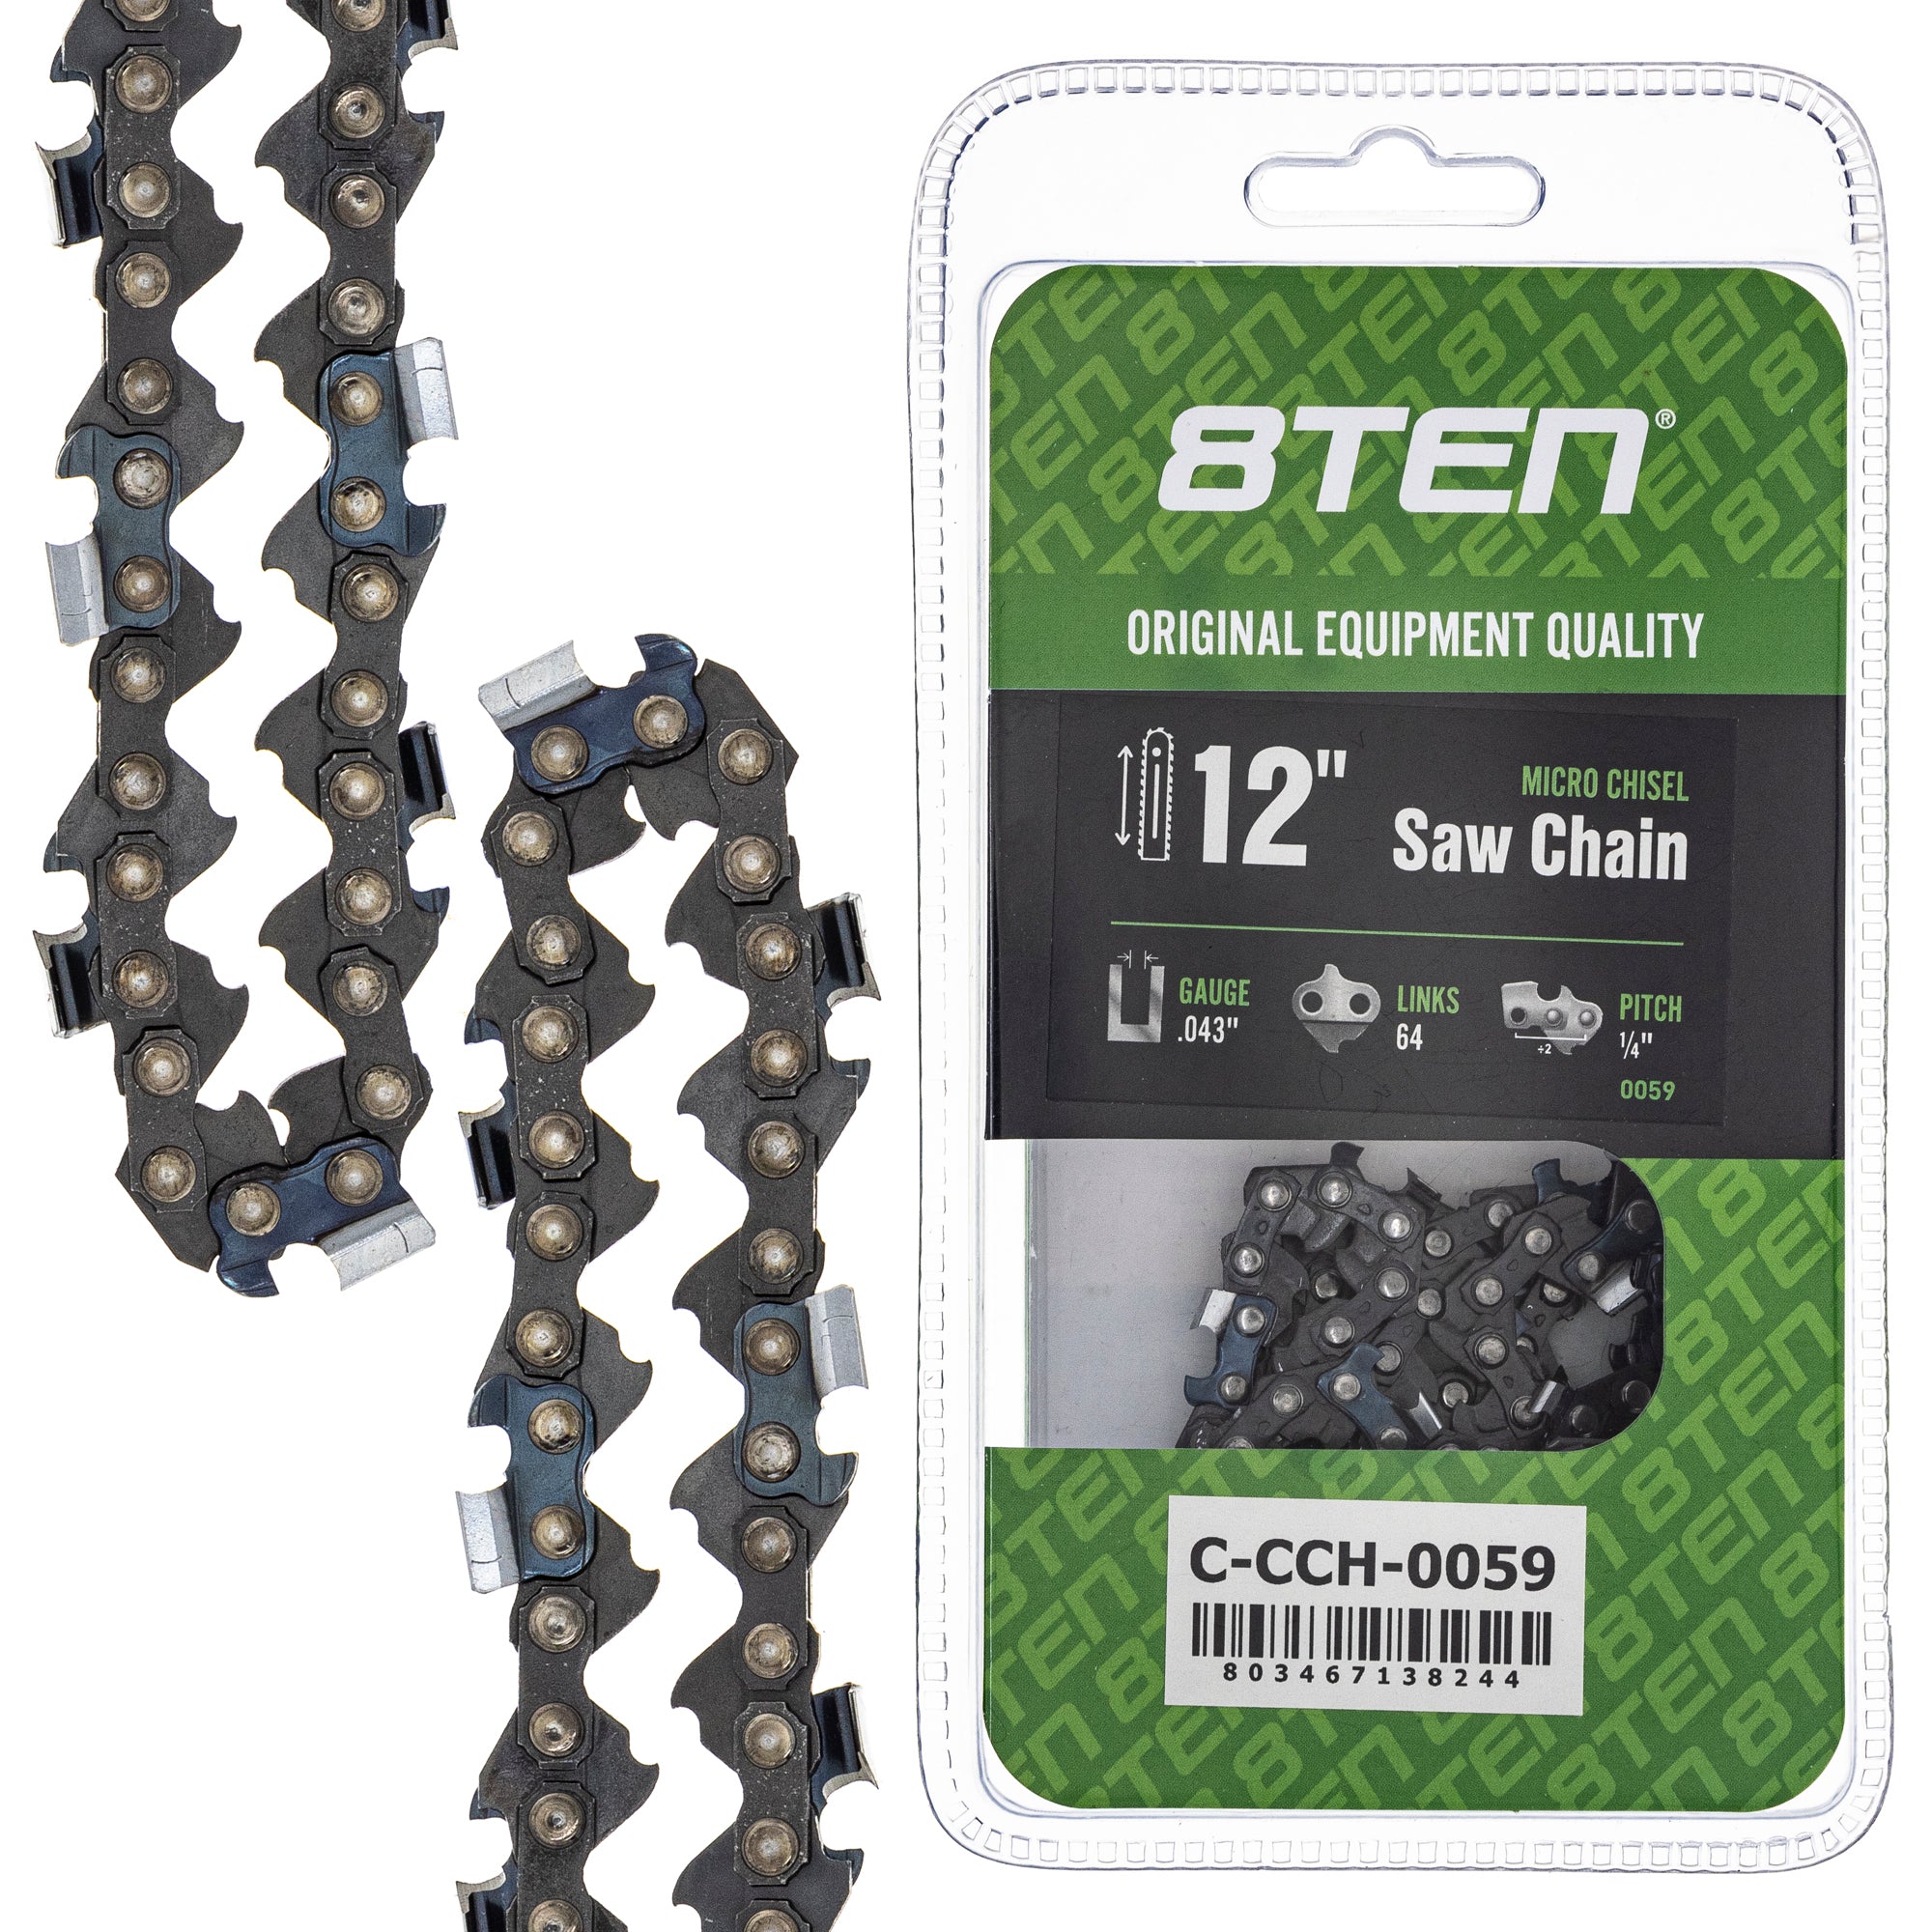 Chainsaw Chain 12 Inch .043 1/4 64DL for zOTHER HT 12 8TEN 810-CCC2271H